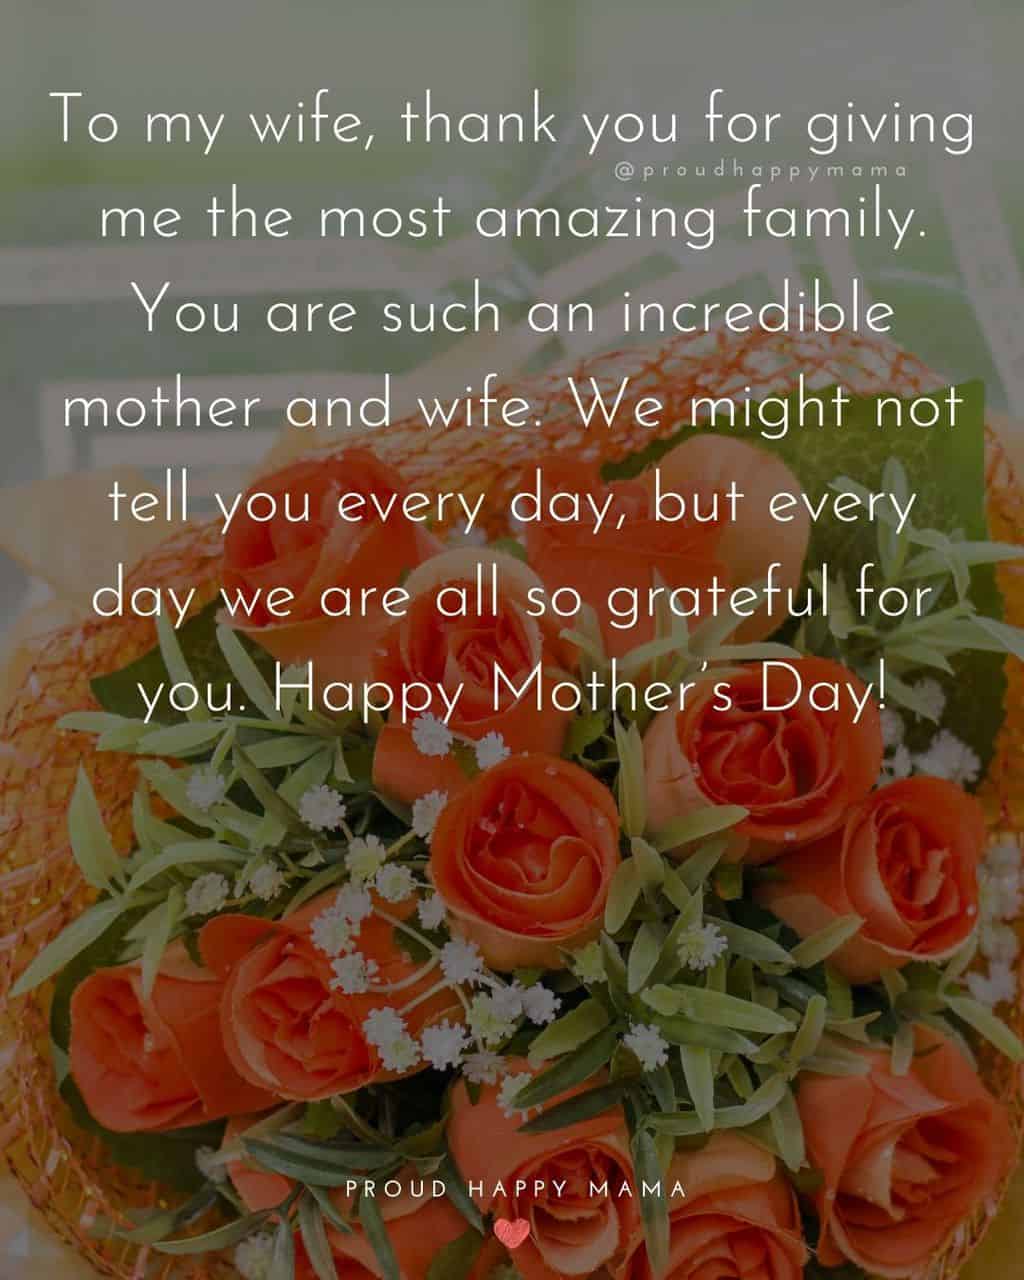 Happy Mothers Day Quotes For Wife - To my wife, thank you for giving me the most amazing family. You are such an incredible